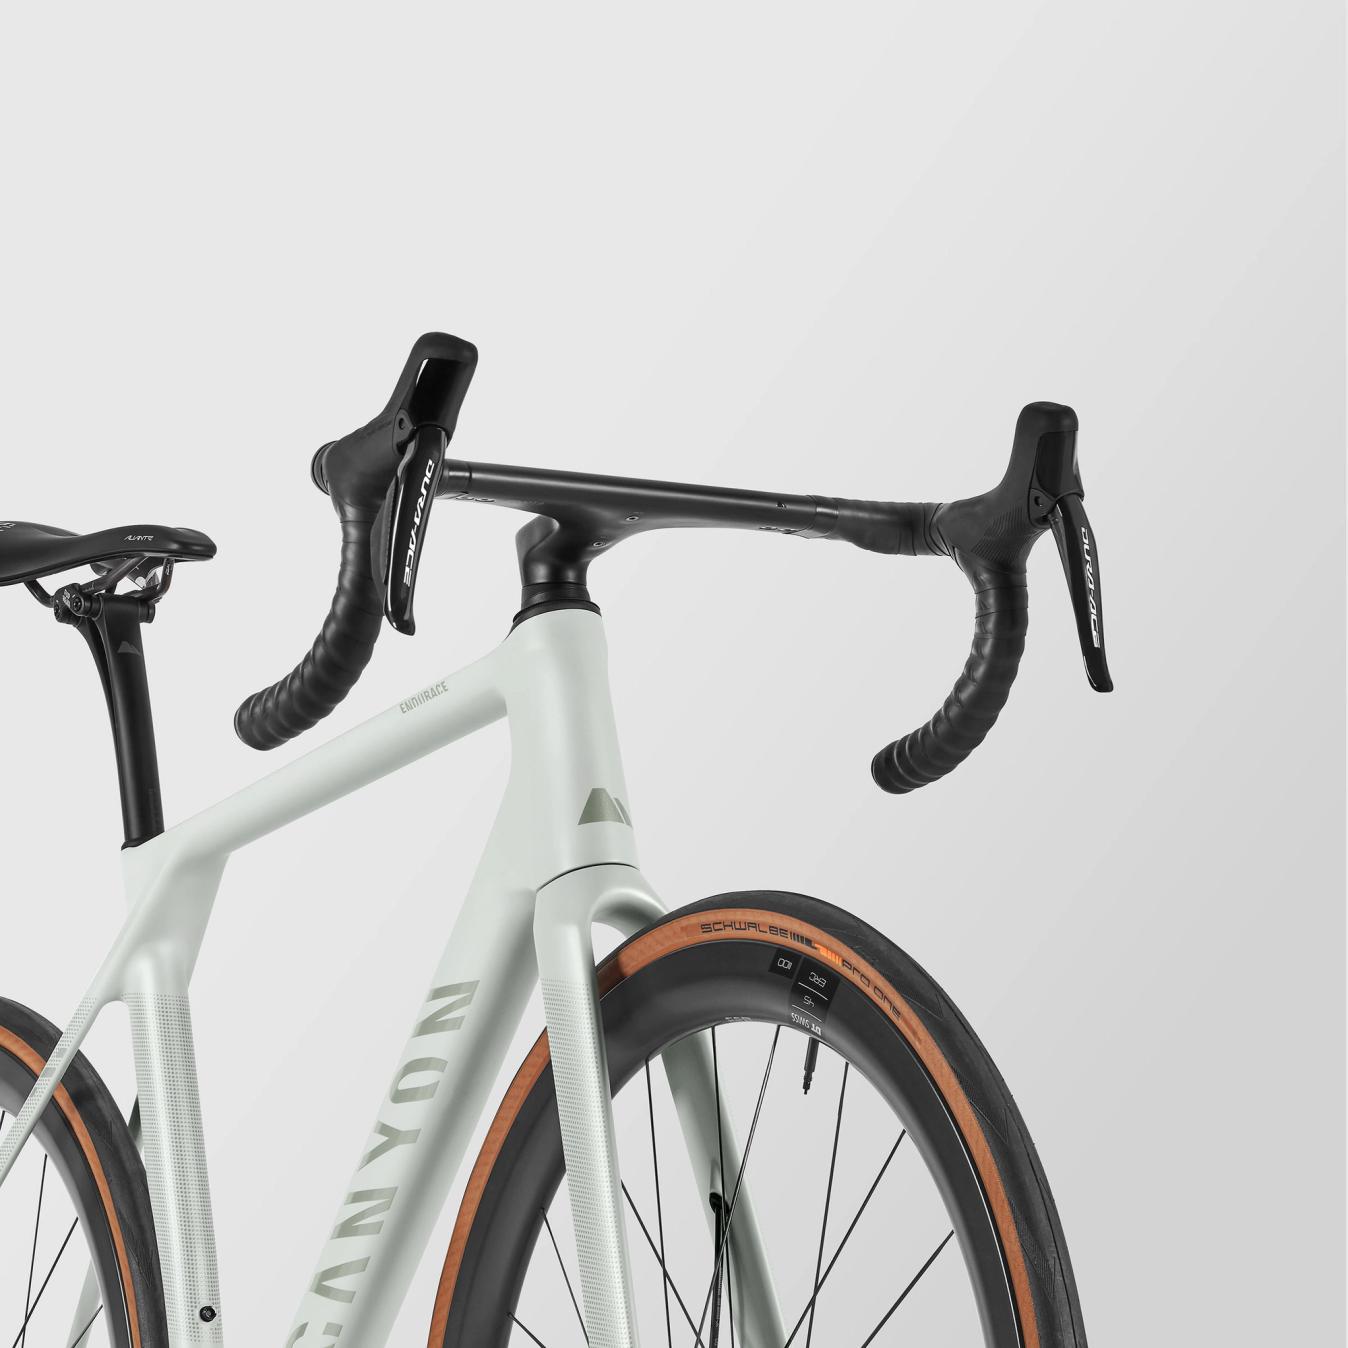 The new head tube and fork profiles help to save seven watts over the outgoing model. 